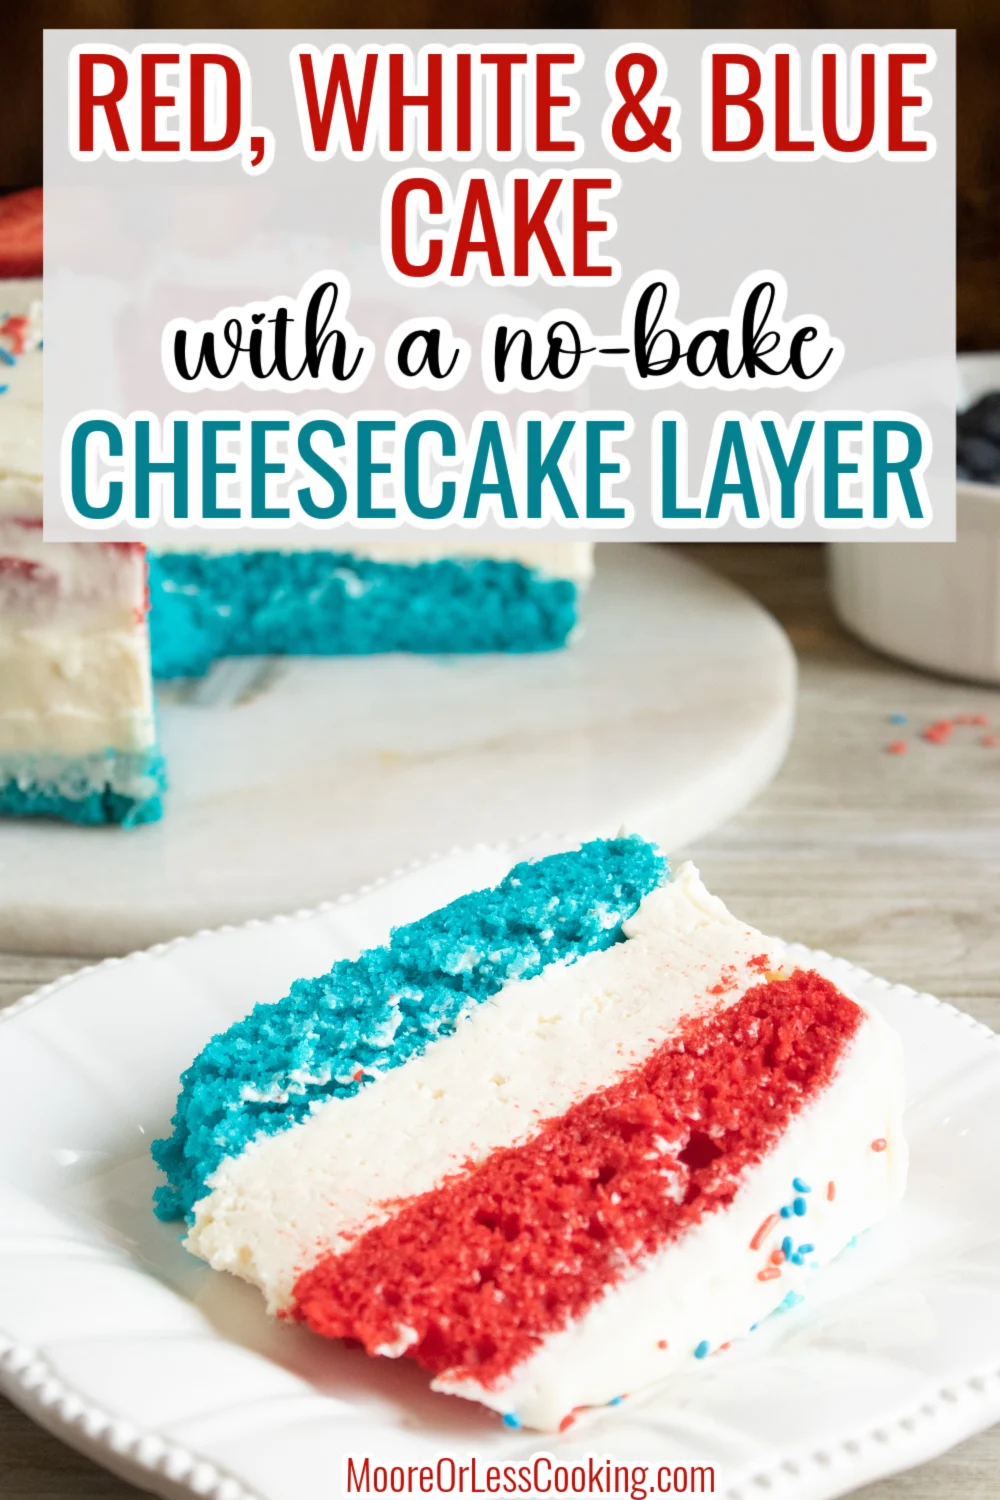 Even though this festive 3-layer cake is a showstopper, especially once you cut into it to reveal the layers of red and blue cake with a creamy white cheesecake layer sandwiched in between, it's actually quite simple to make. via @Mooreorlesscook